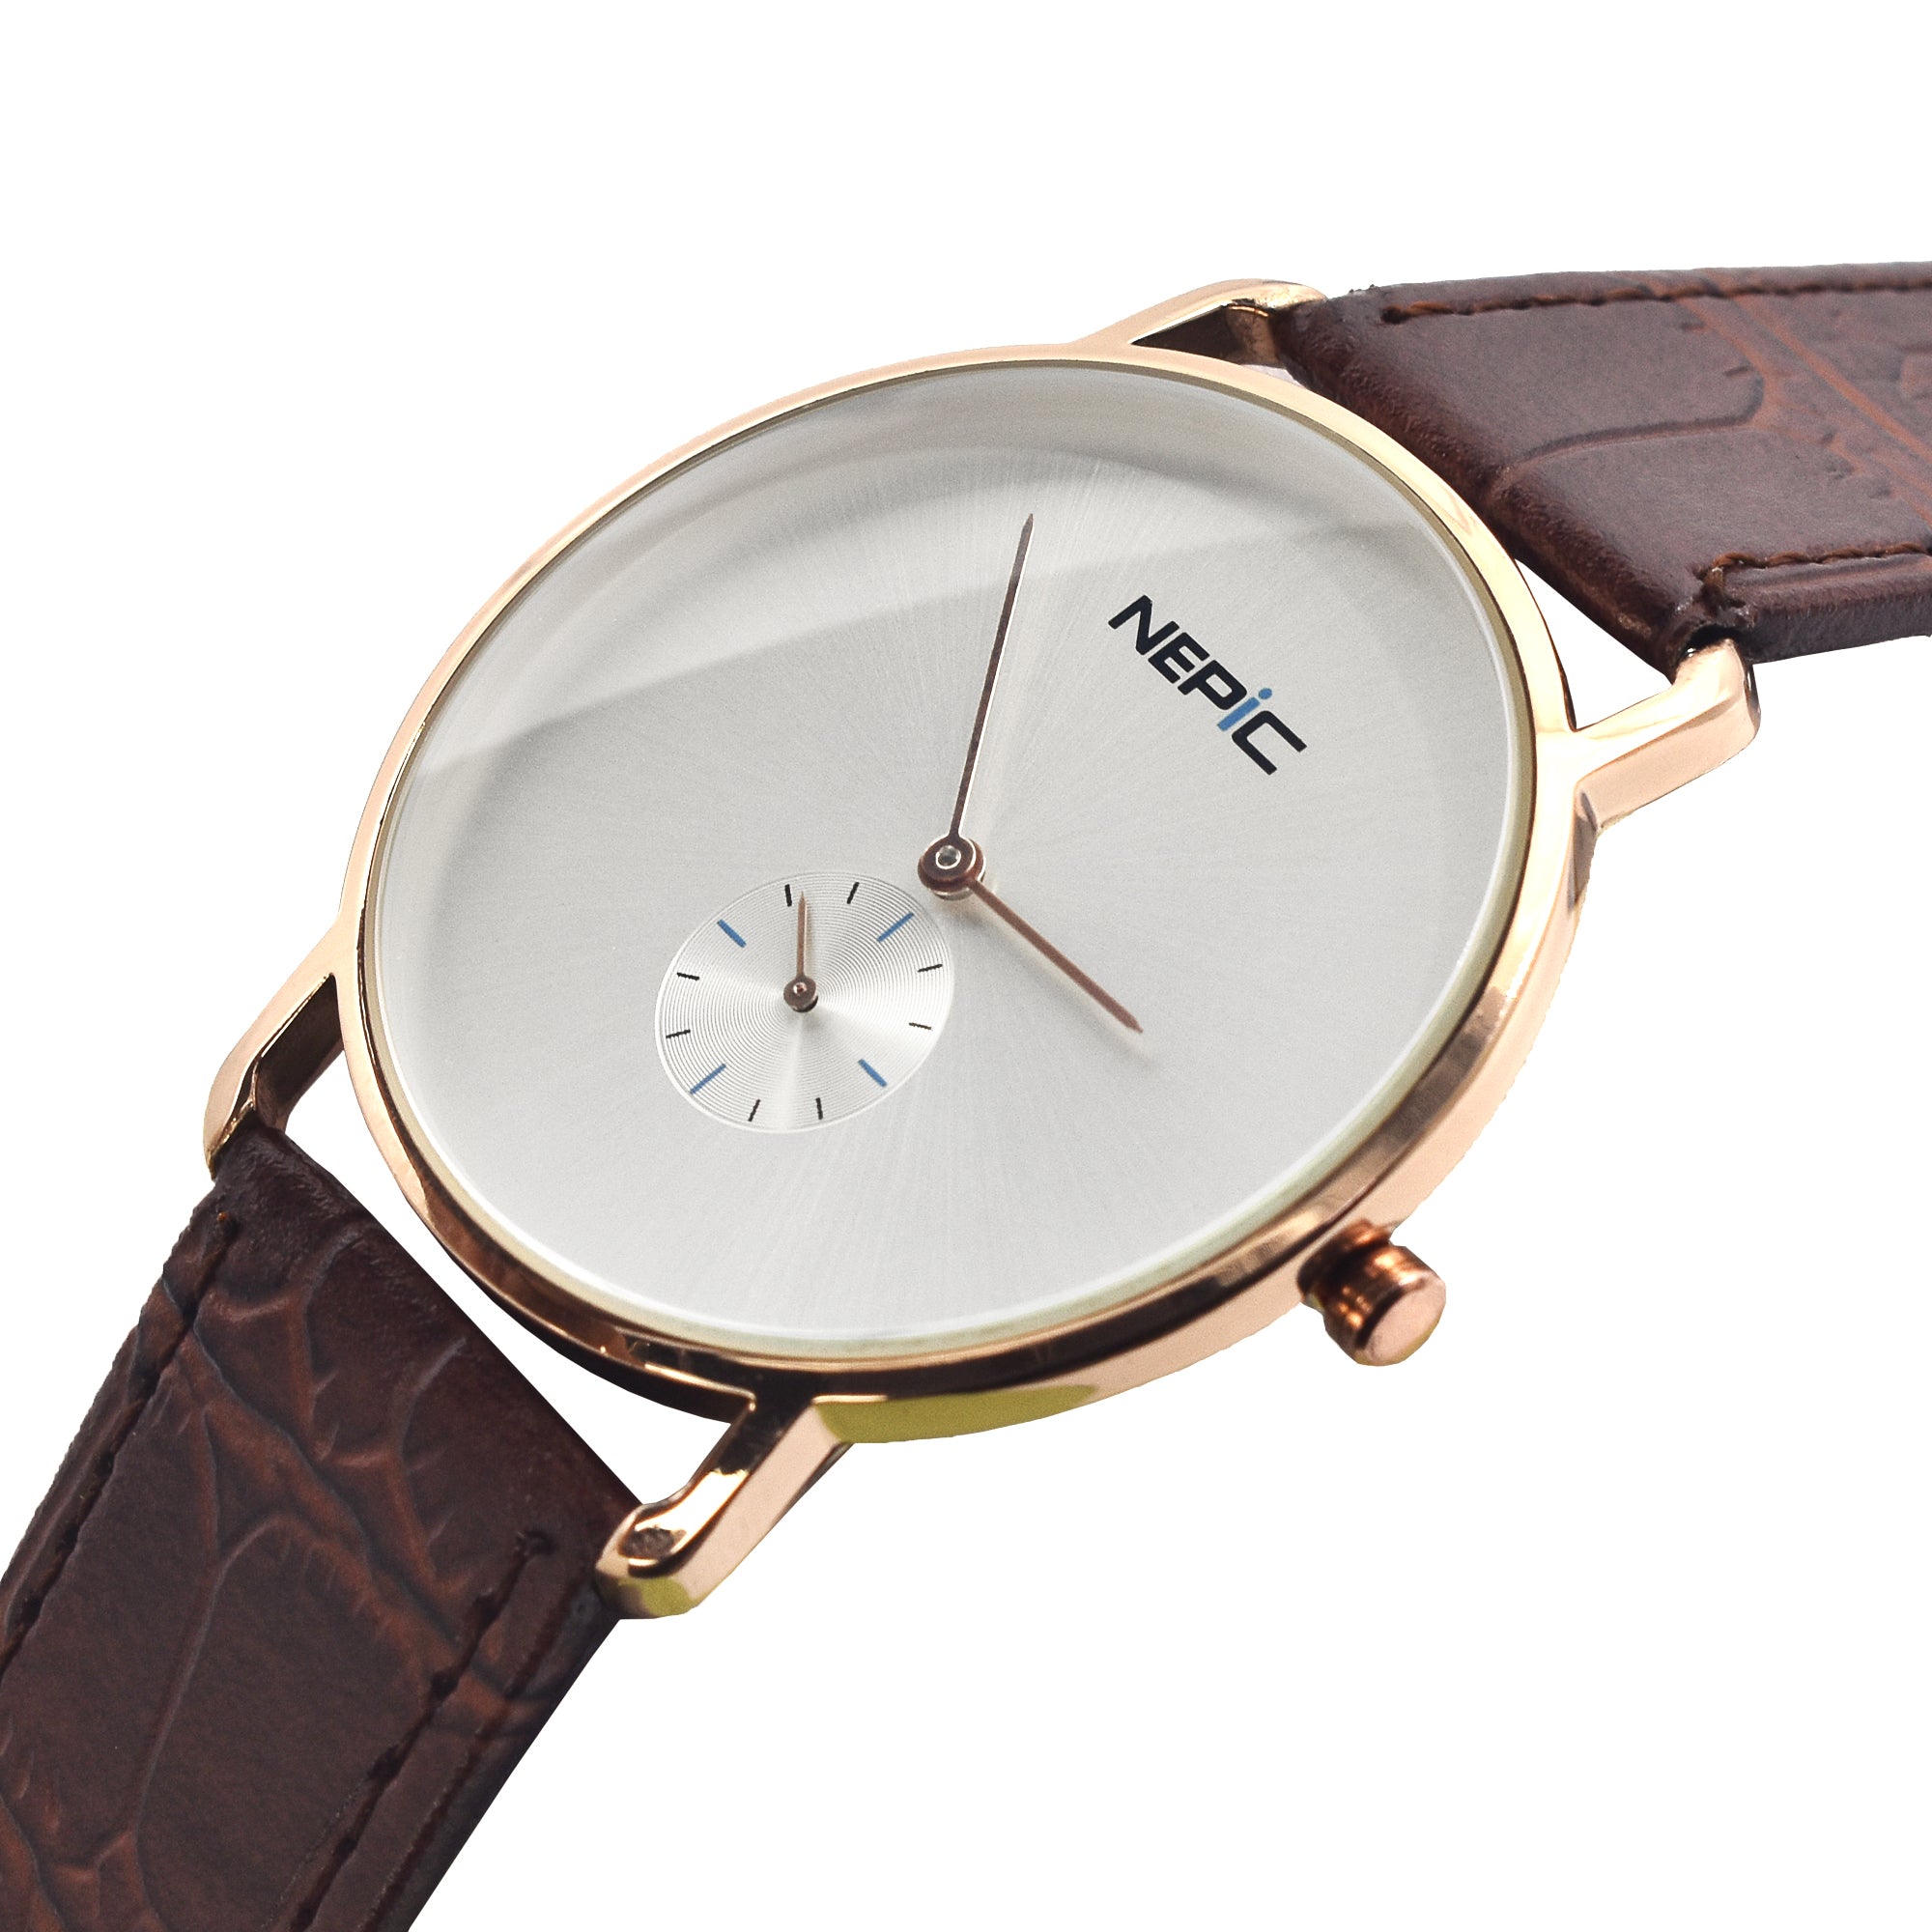 Nepic- N325 men's leather strap watch